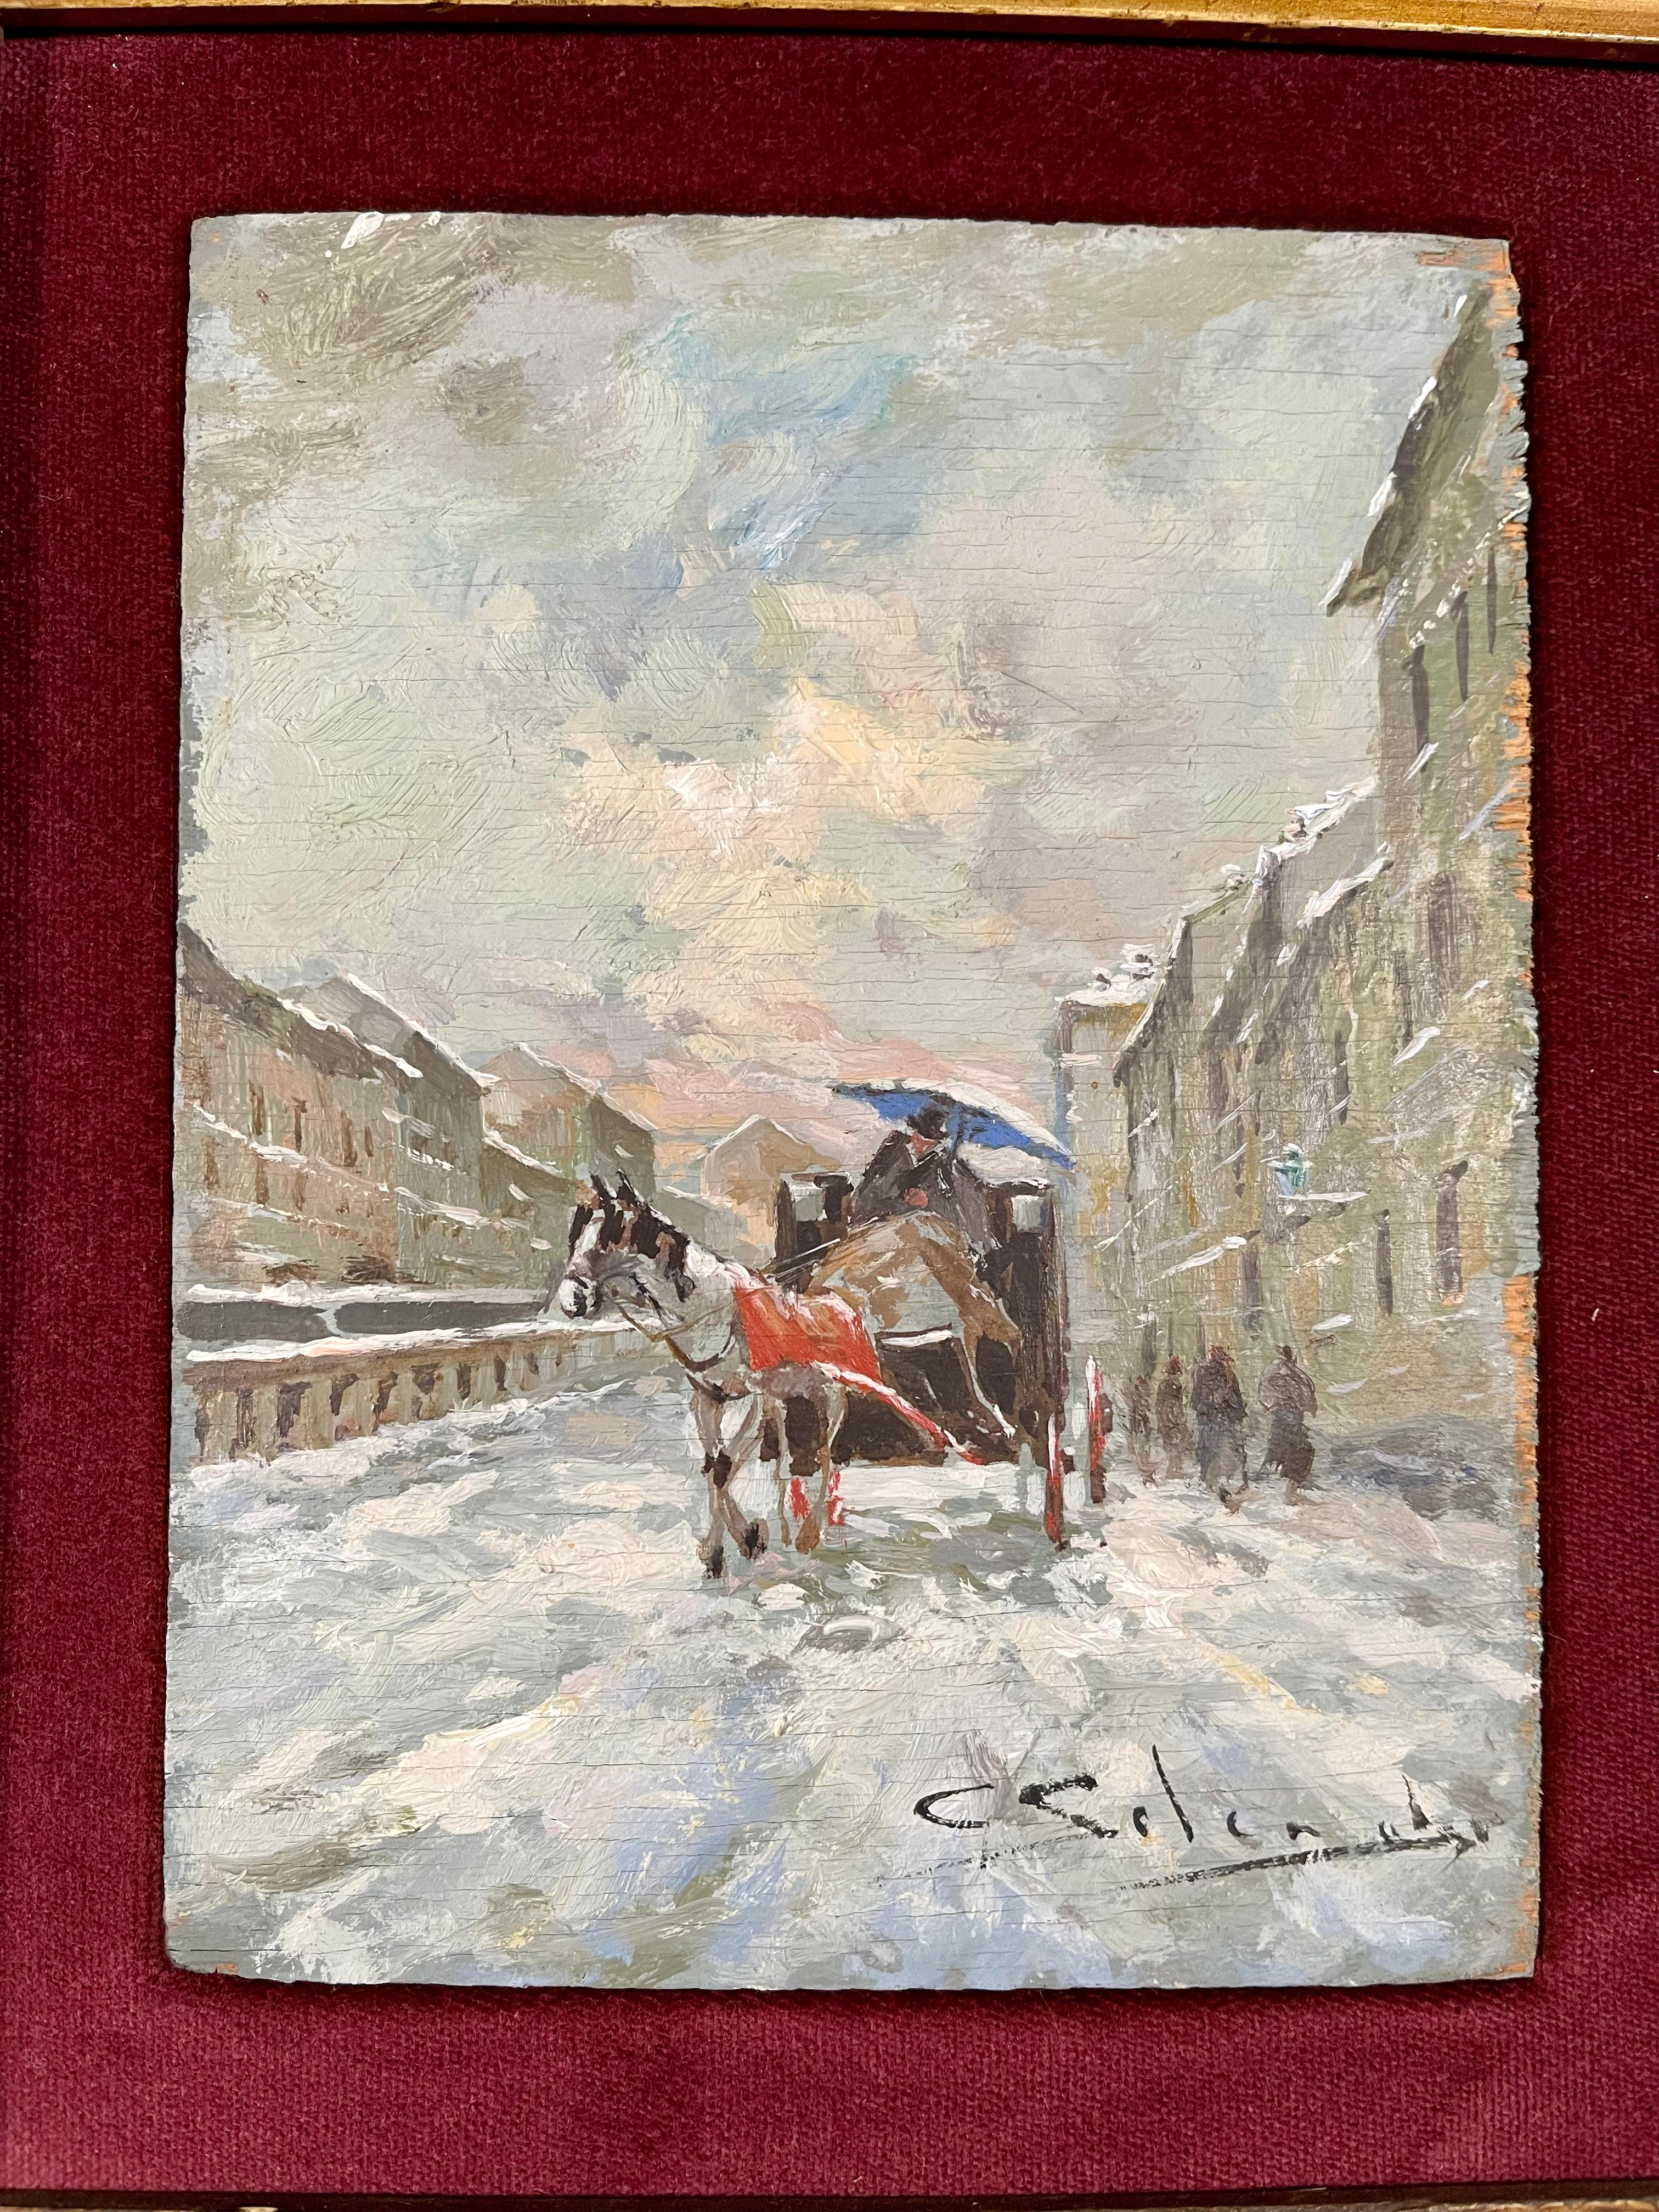 Beautiful oil on panel painting by the great Milanese artist Giuseppe Solenghi signed at lower right.
It depicts a classic his foreshortening of Milan under the snow of the Bella Epoque.
Dimensions with frame cm 23 x 28
Every item in our Gallery